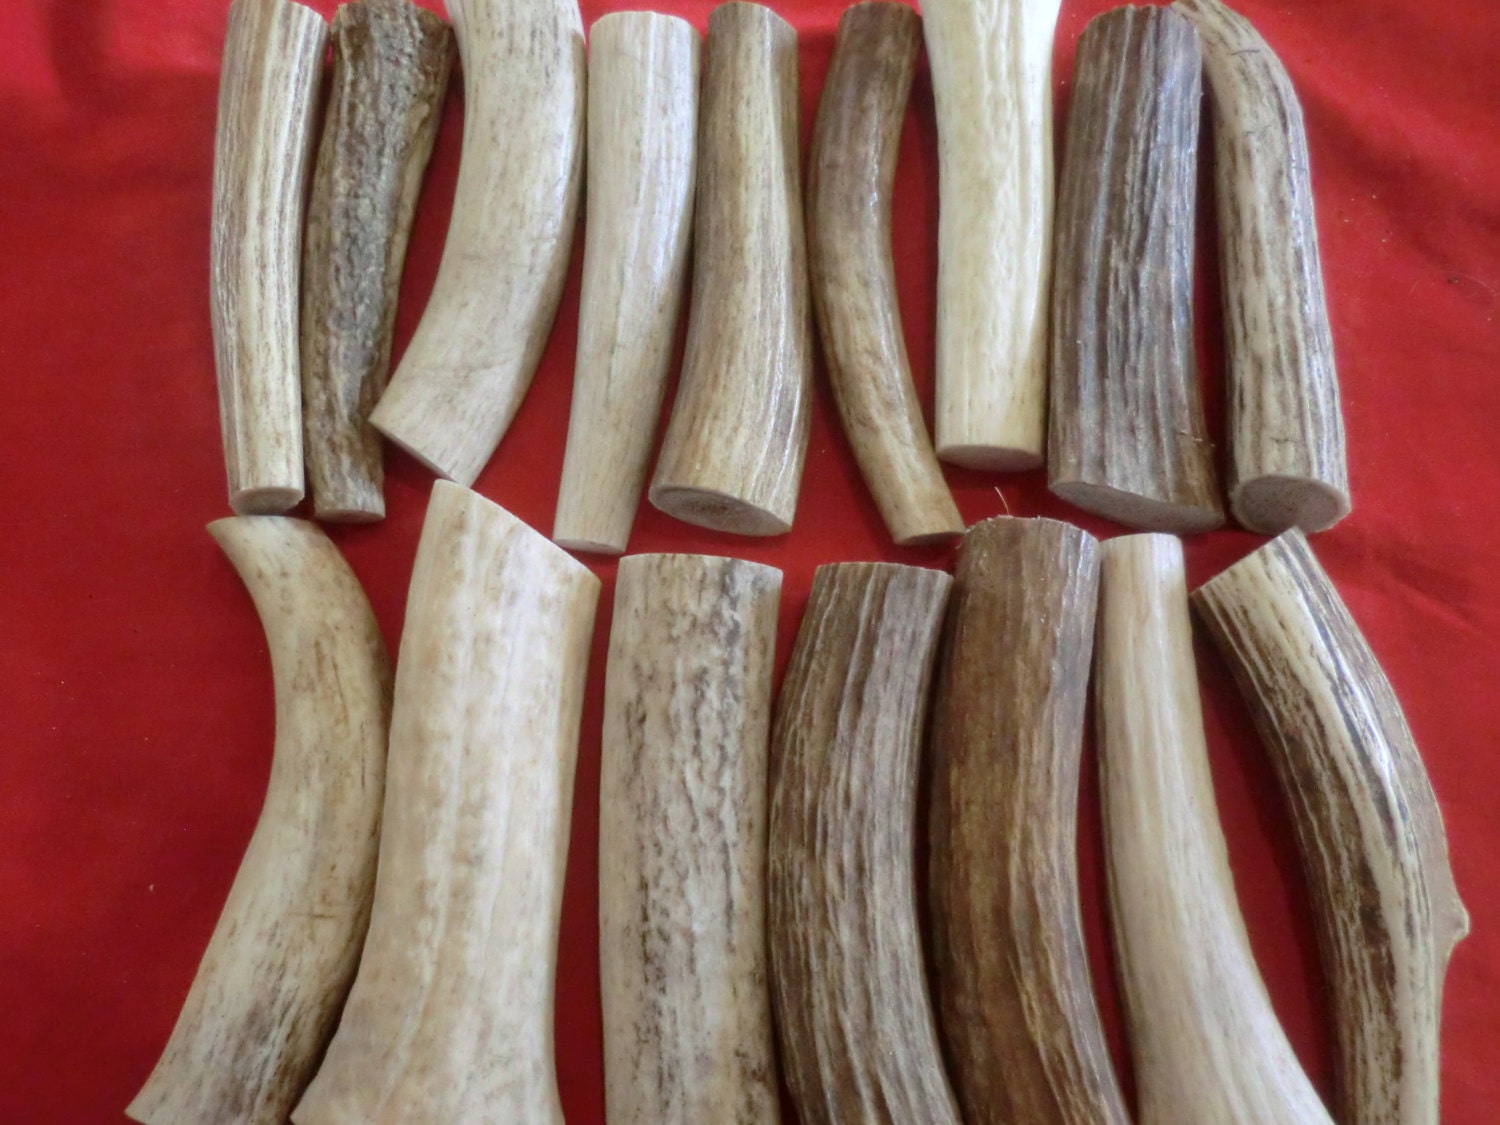 elk antler dog chews real antler dogs just love these chews